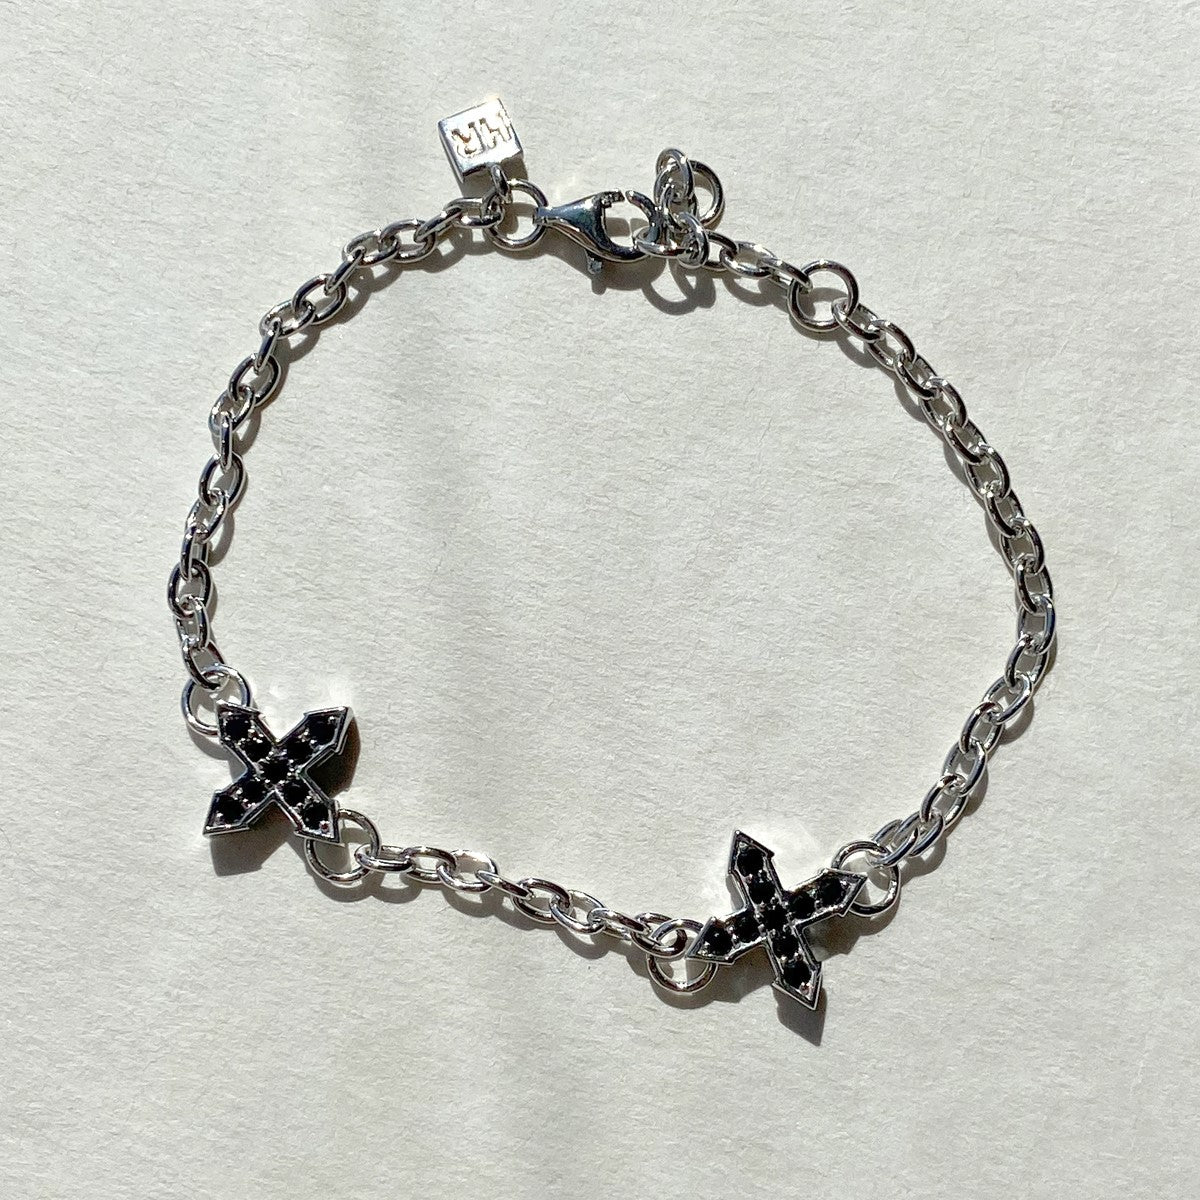 CHAIN BRACELET "TWO STARS "GLOW" WITH BLACK SPINEL / SILVER